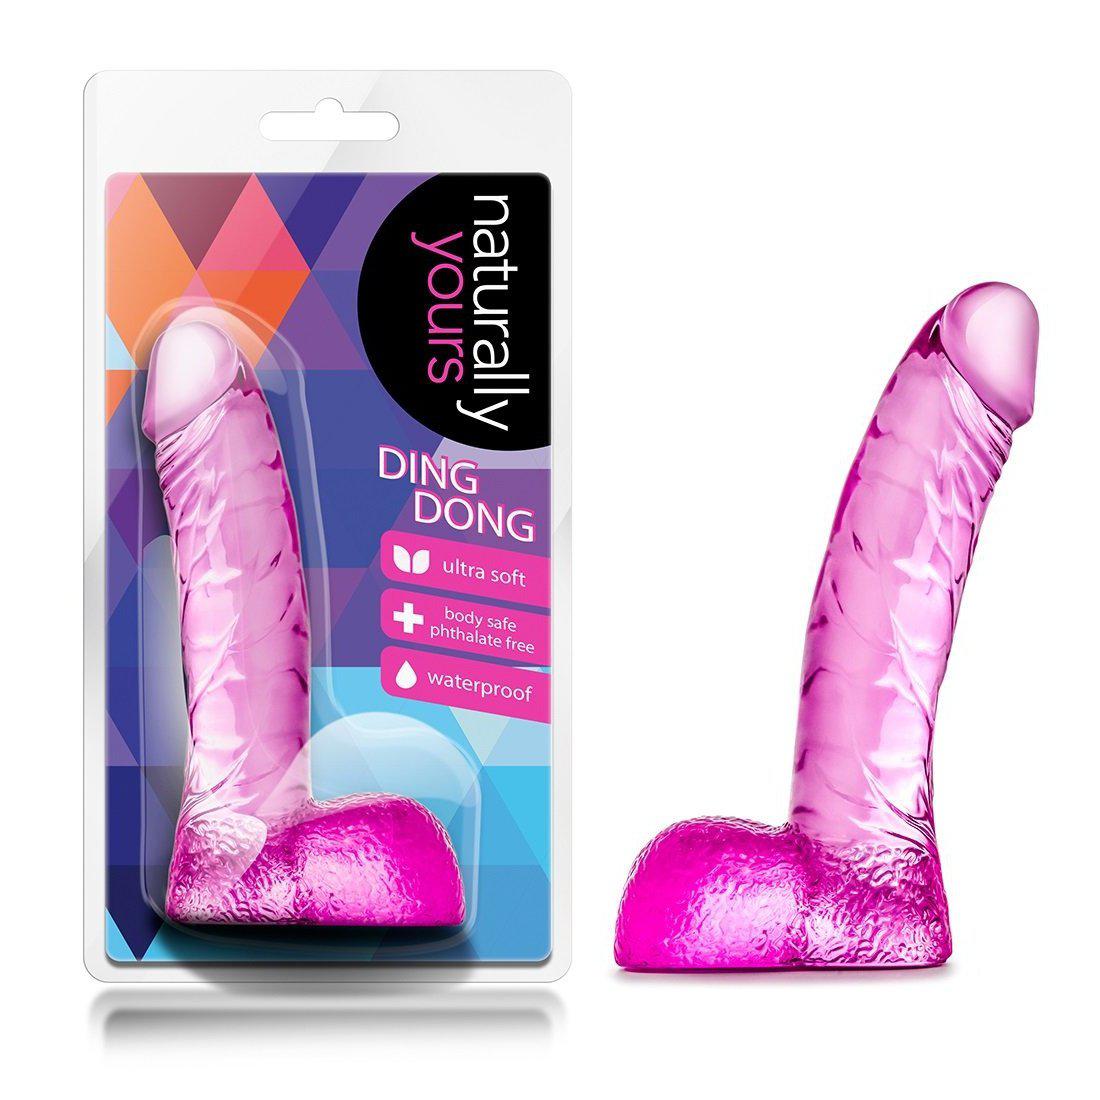 Naturally Yours Ding Dong - Pink